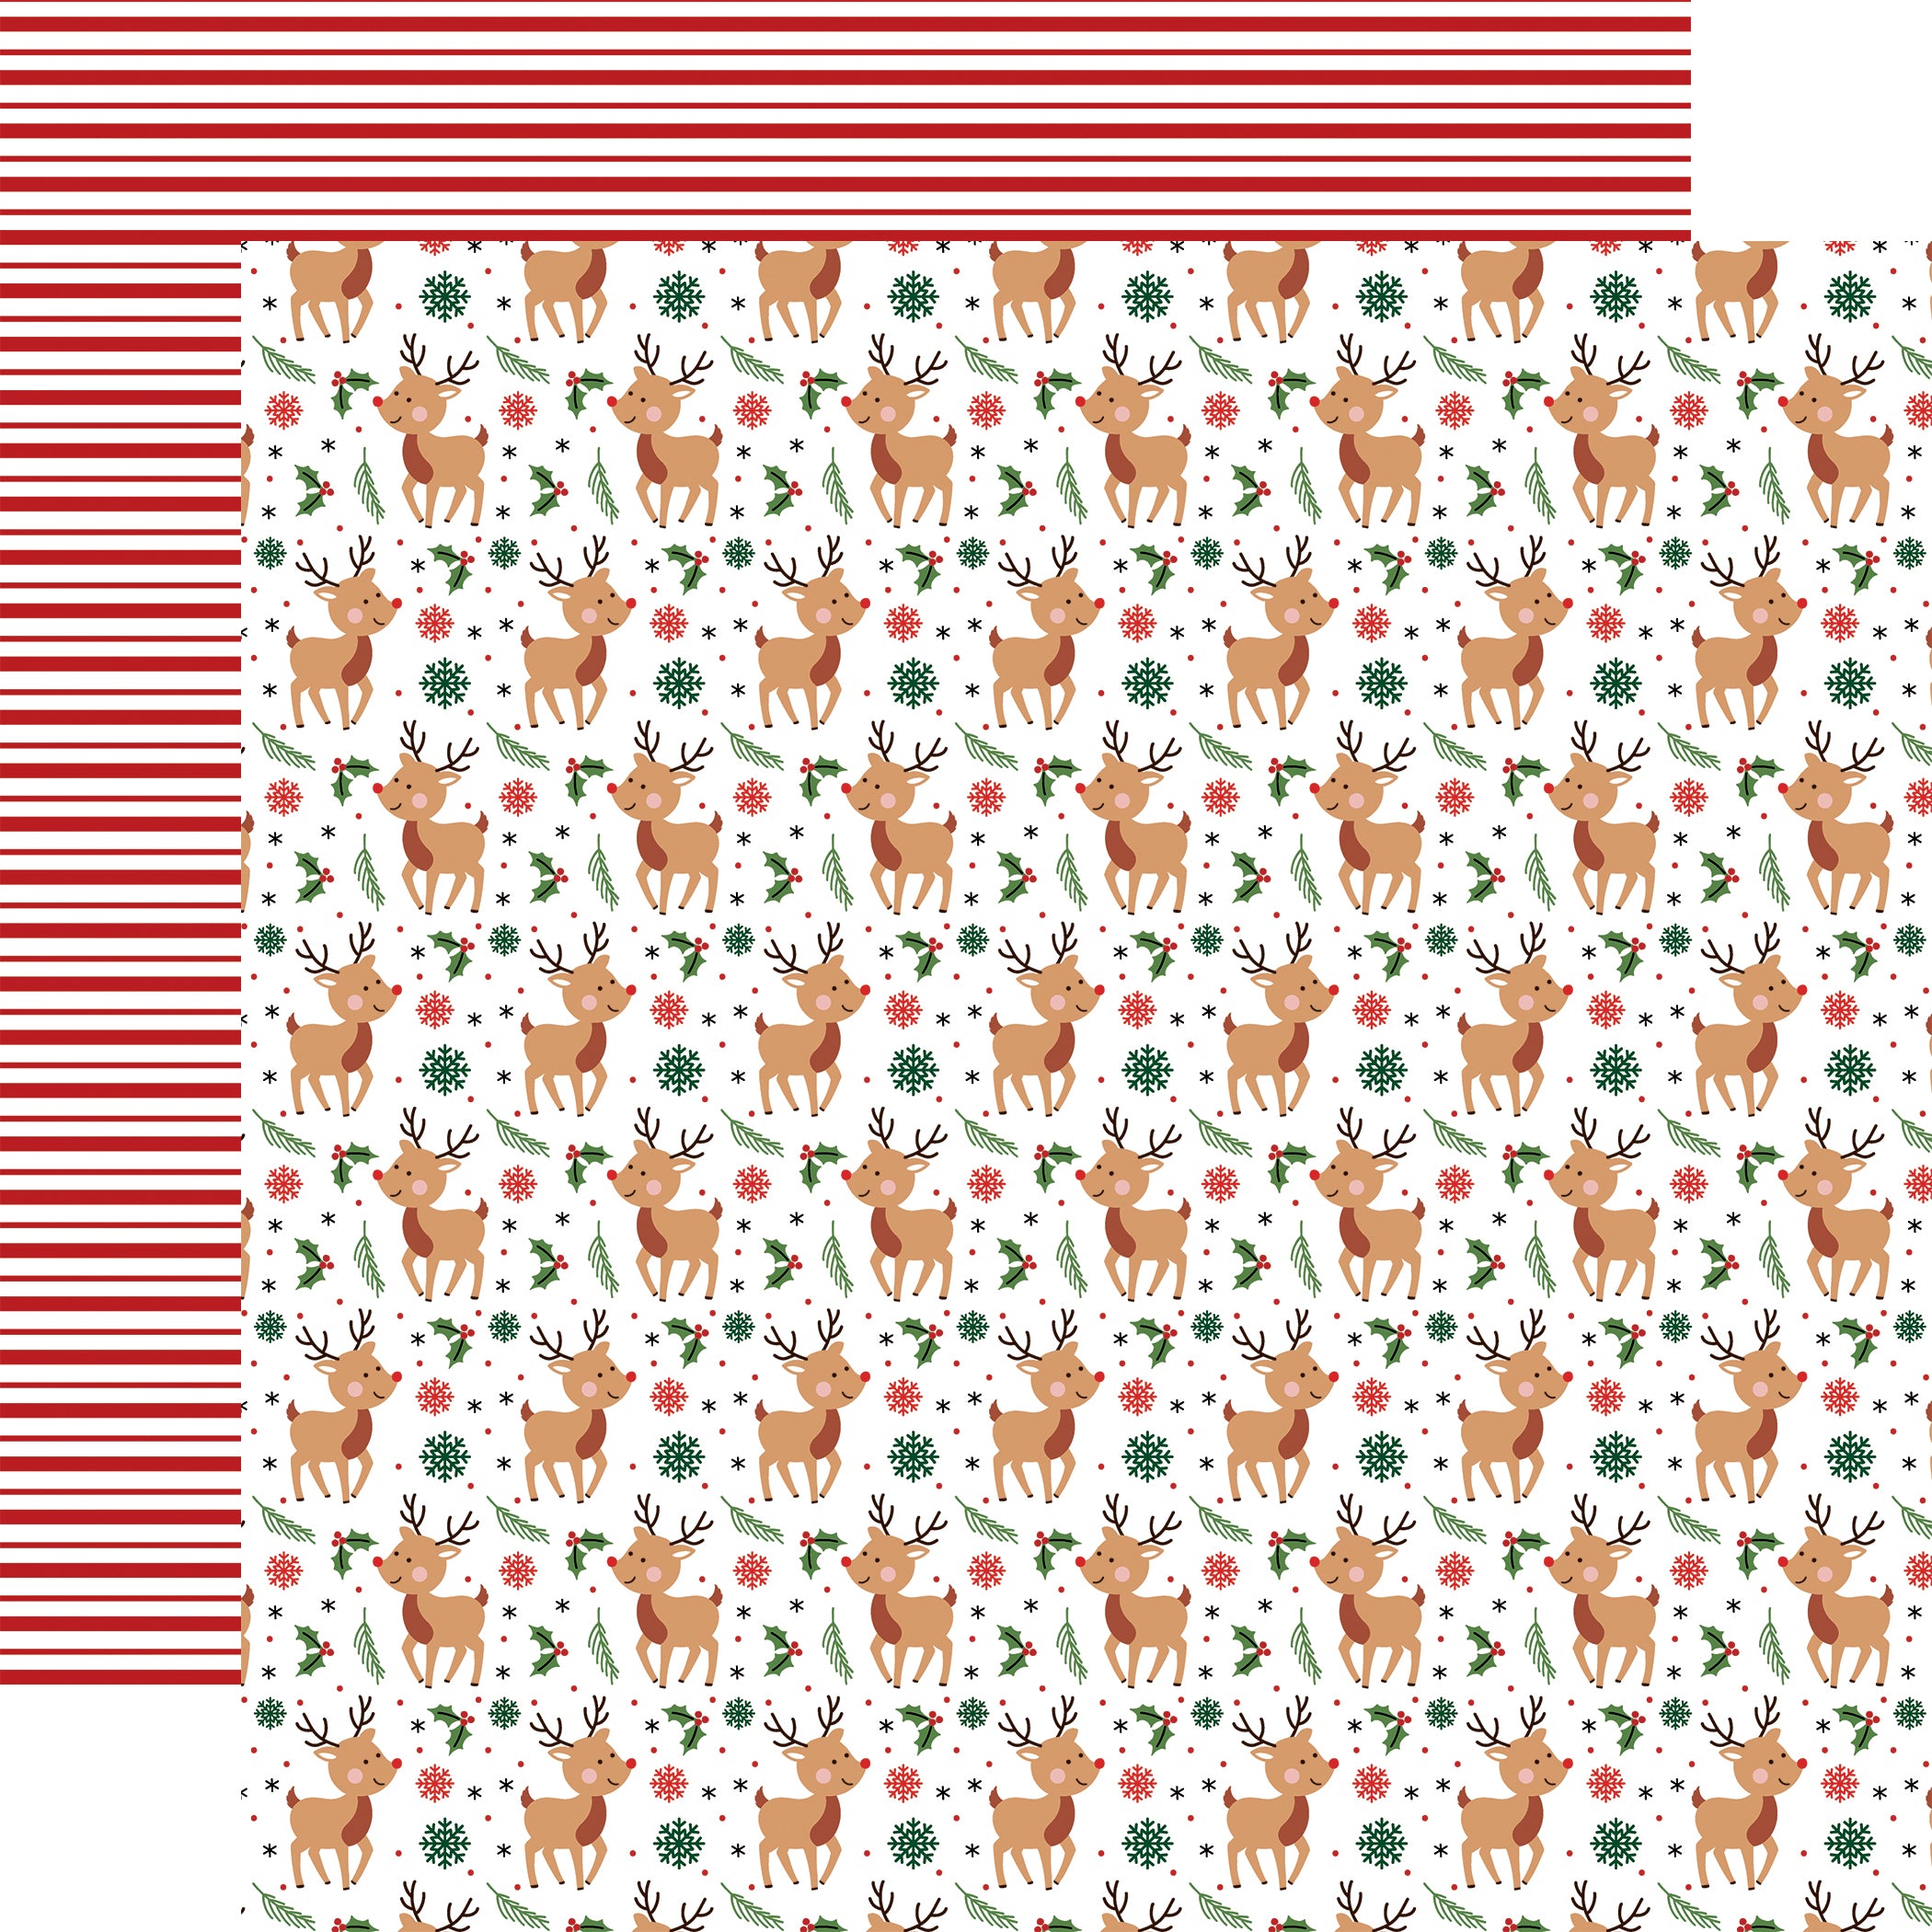 Have A Holly Jolly Christmas Collection Dashing Deer 12 x 12 Double-Sided Scrapbook Paper by Echo Park Paper